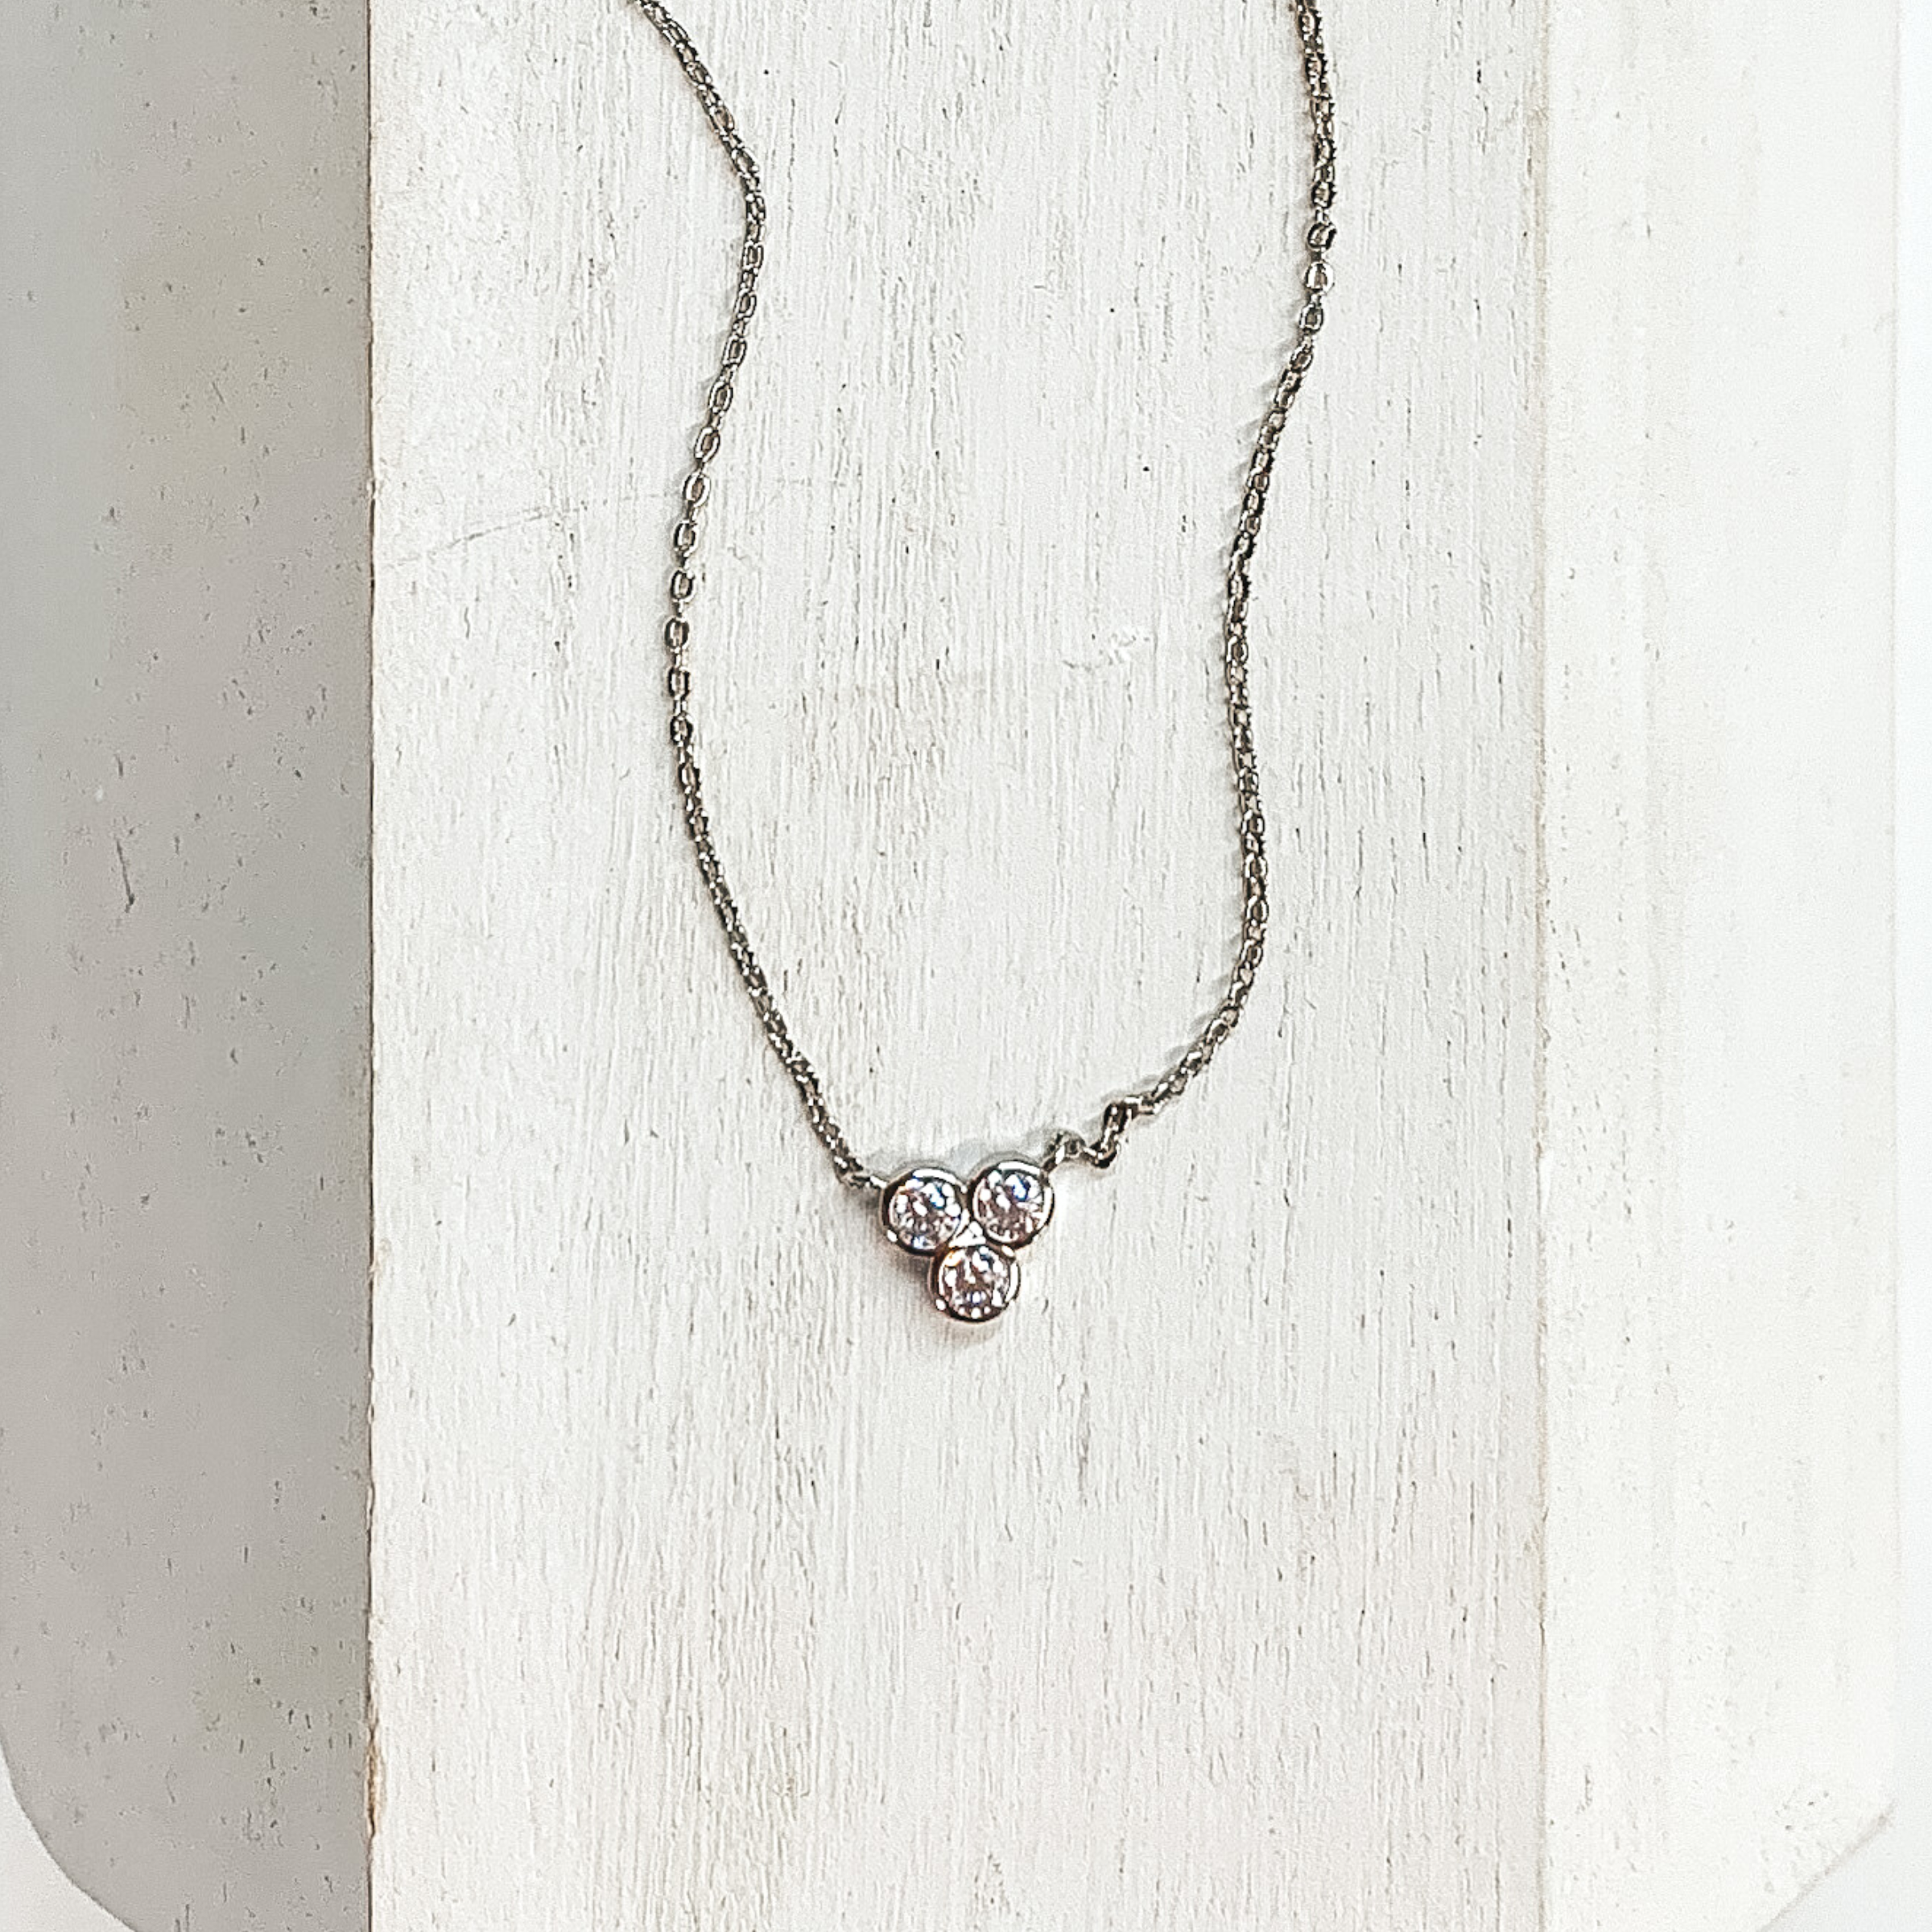 Good Daze Necklace with 3mm CZ Crystals in a Bezel Cluster in Silver - Giddy Up Glamour Boutique